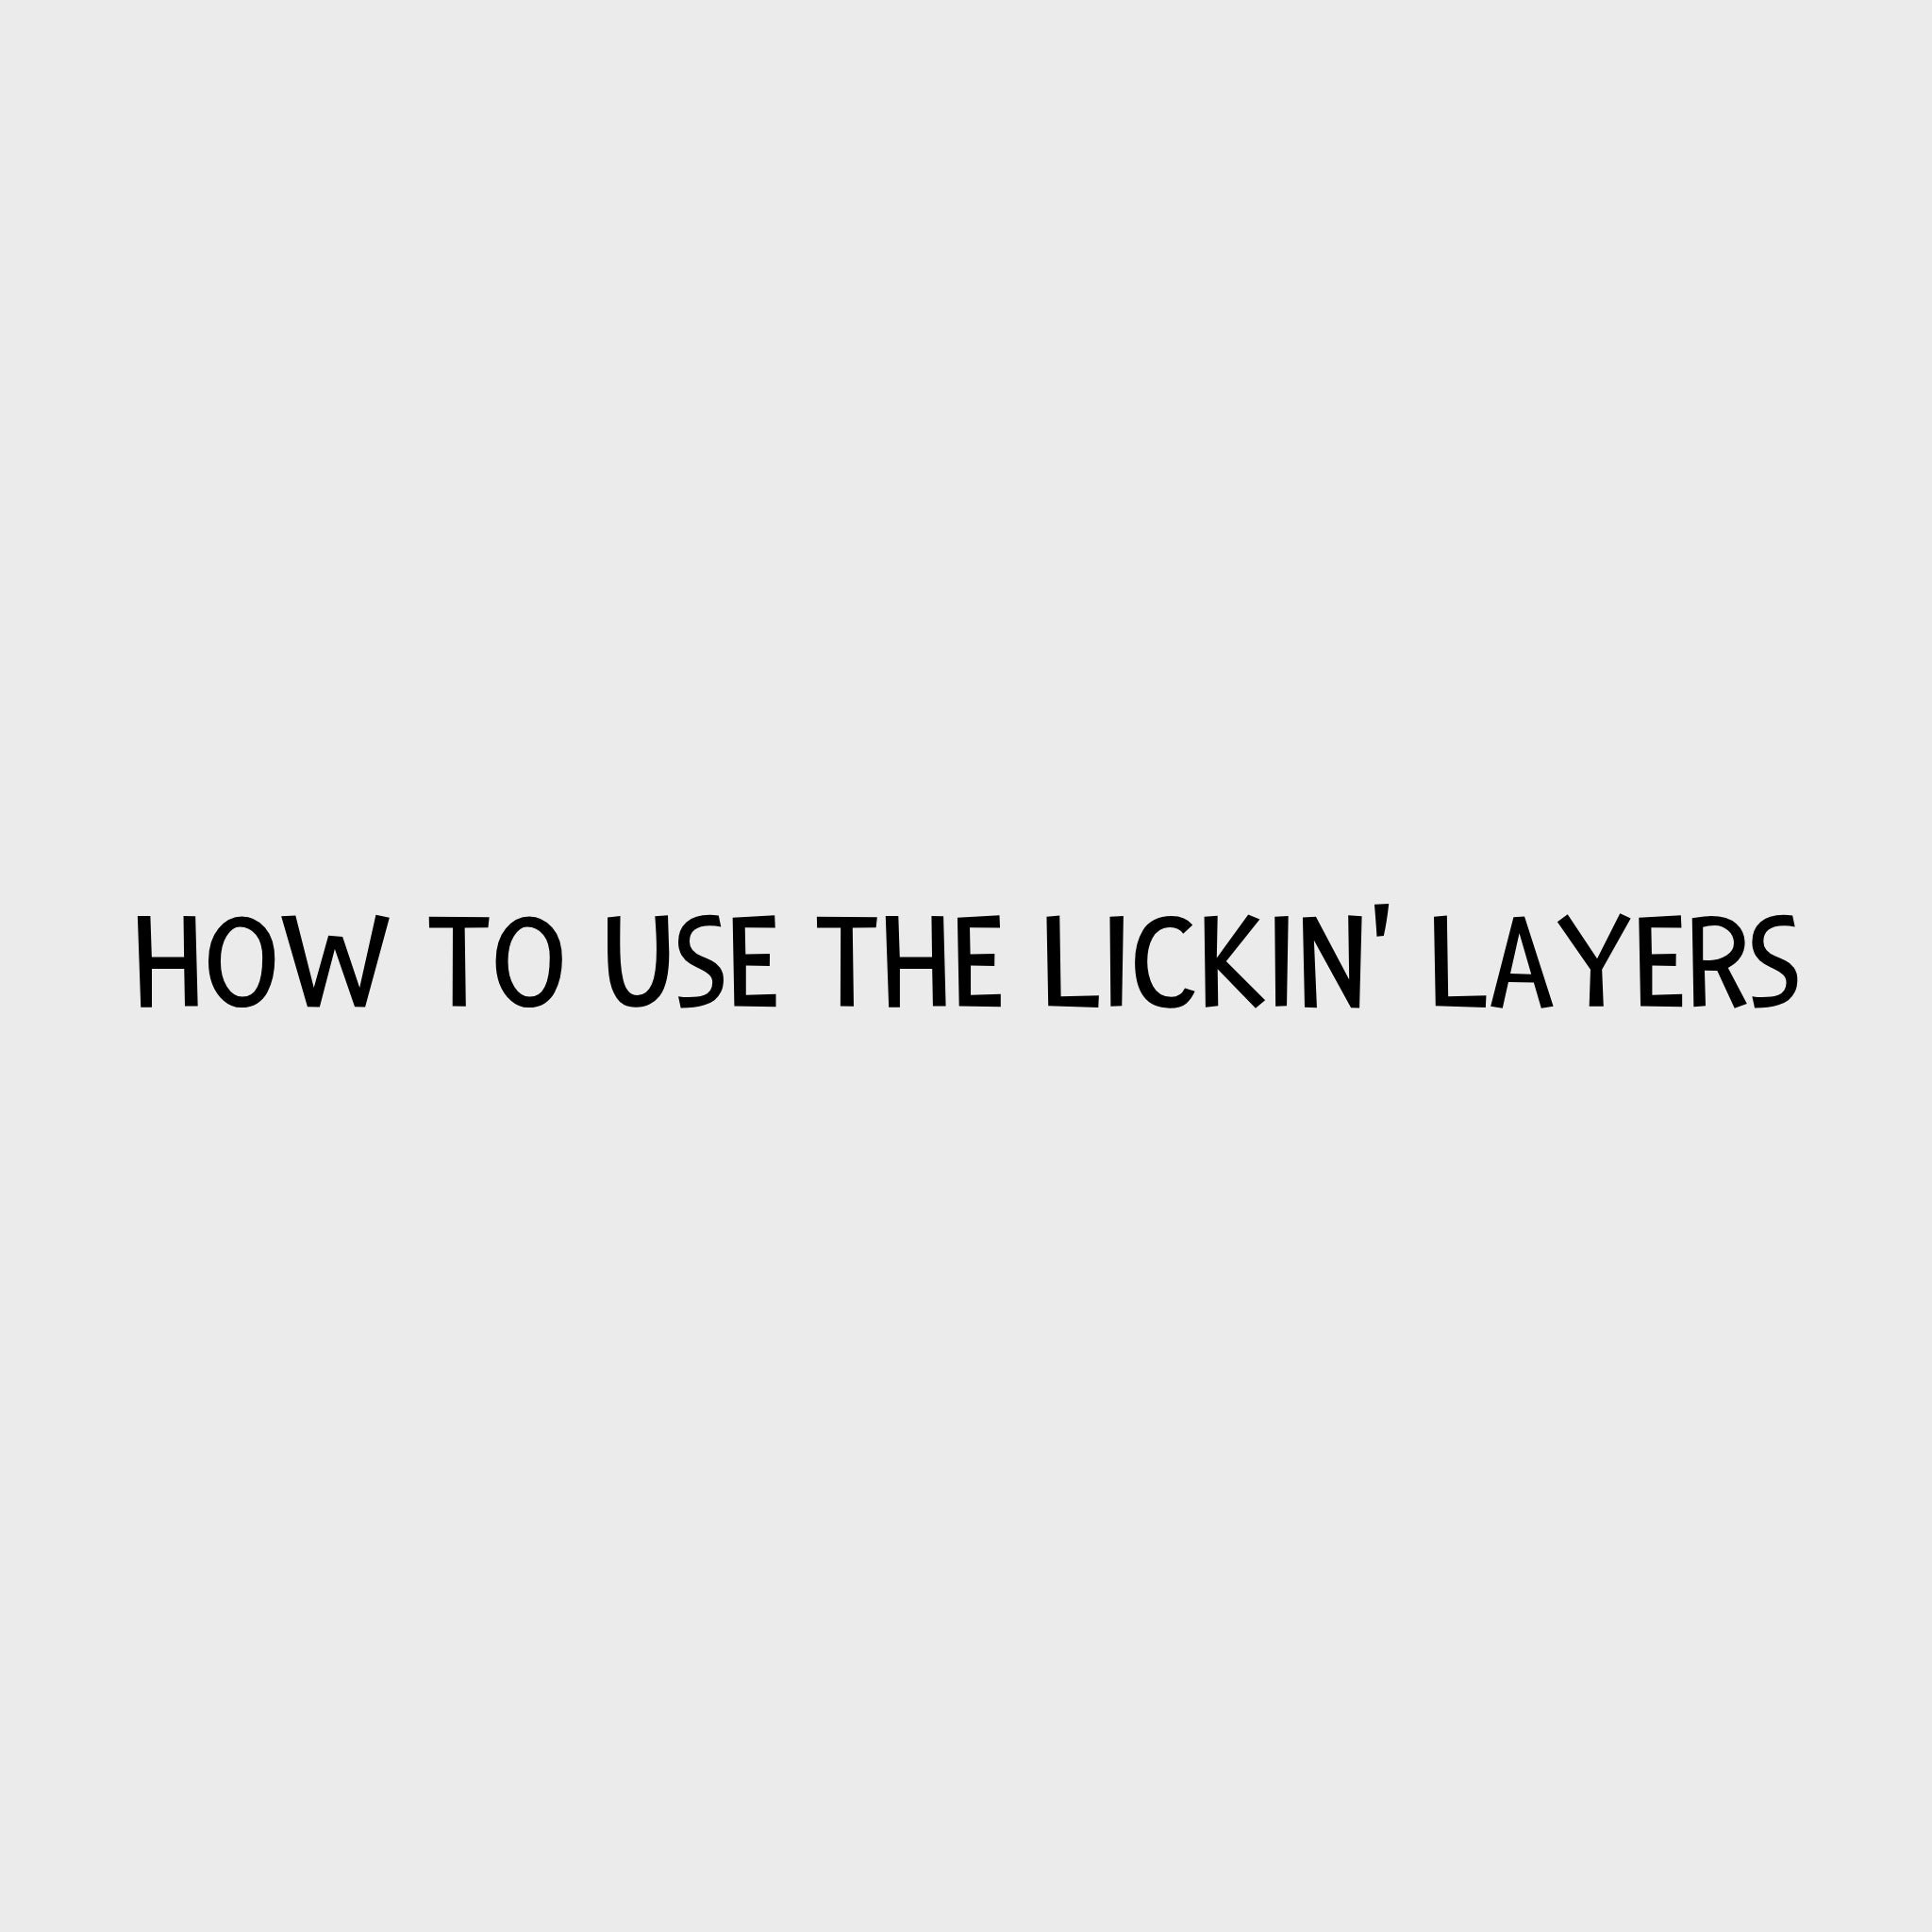 Video - How to use the Nina Ottosson Lickin' Layers